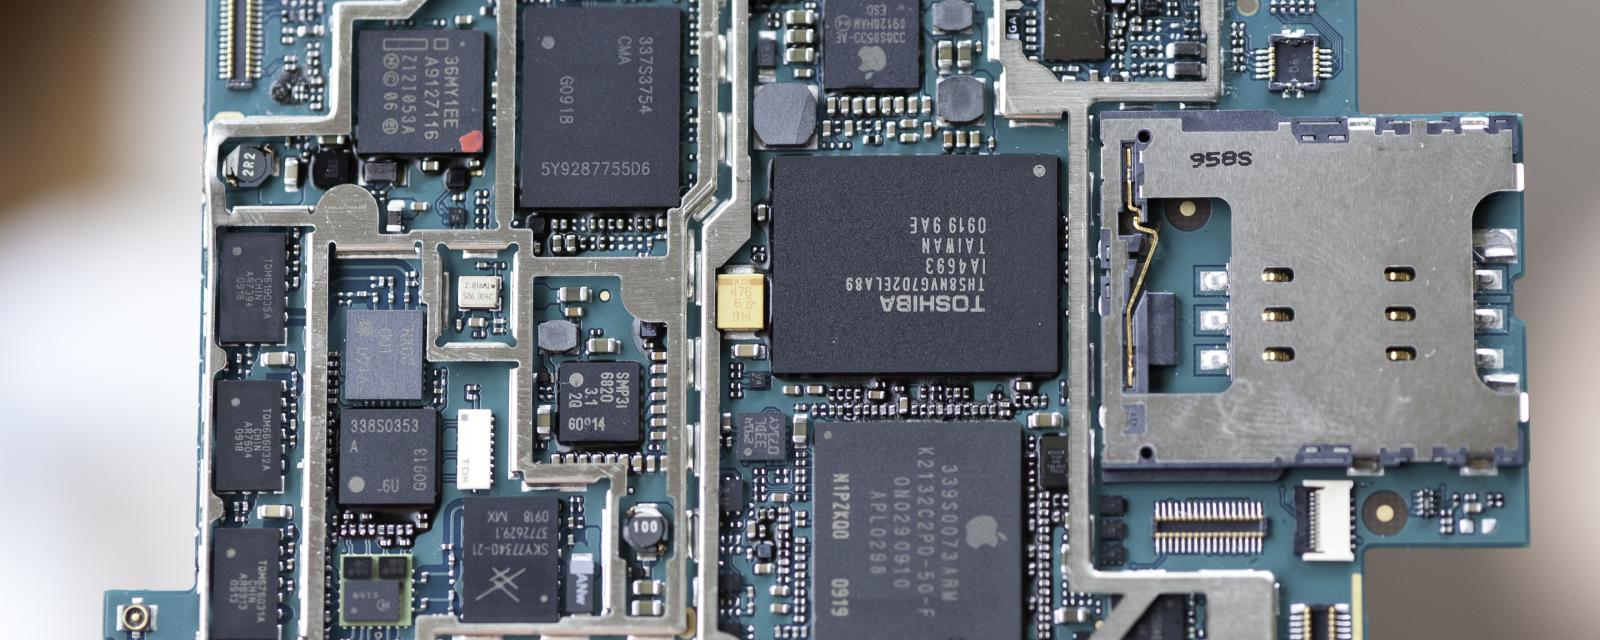 Photograph of an Apple iPhone motherboard.